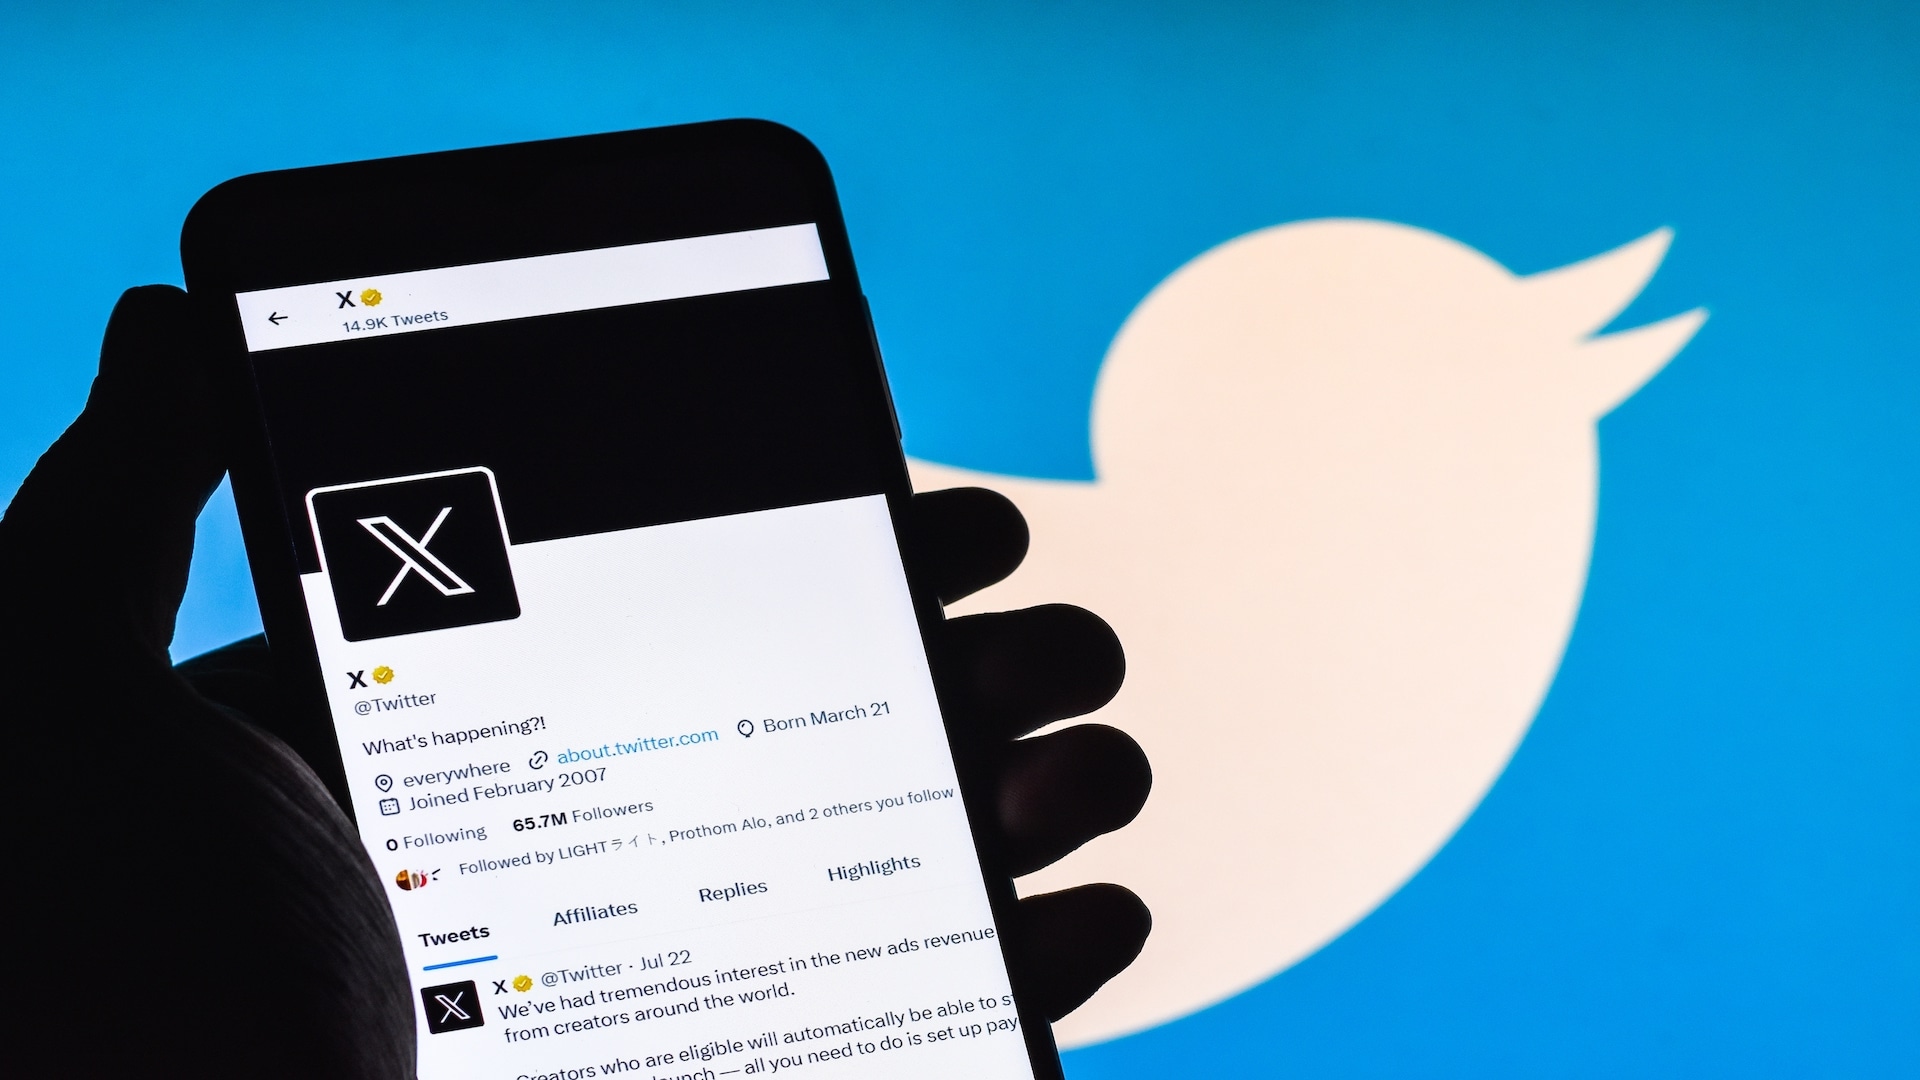 X (Twitter) lowers eligibility criteria for ads revenue sharing program